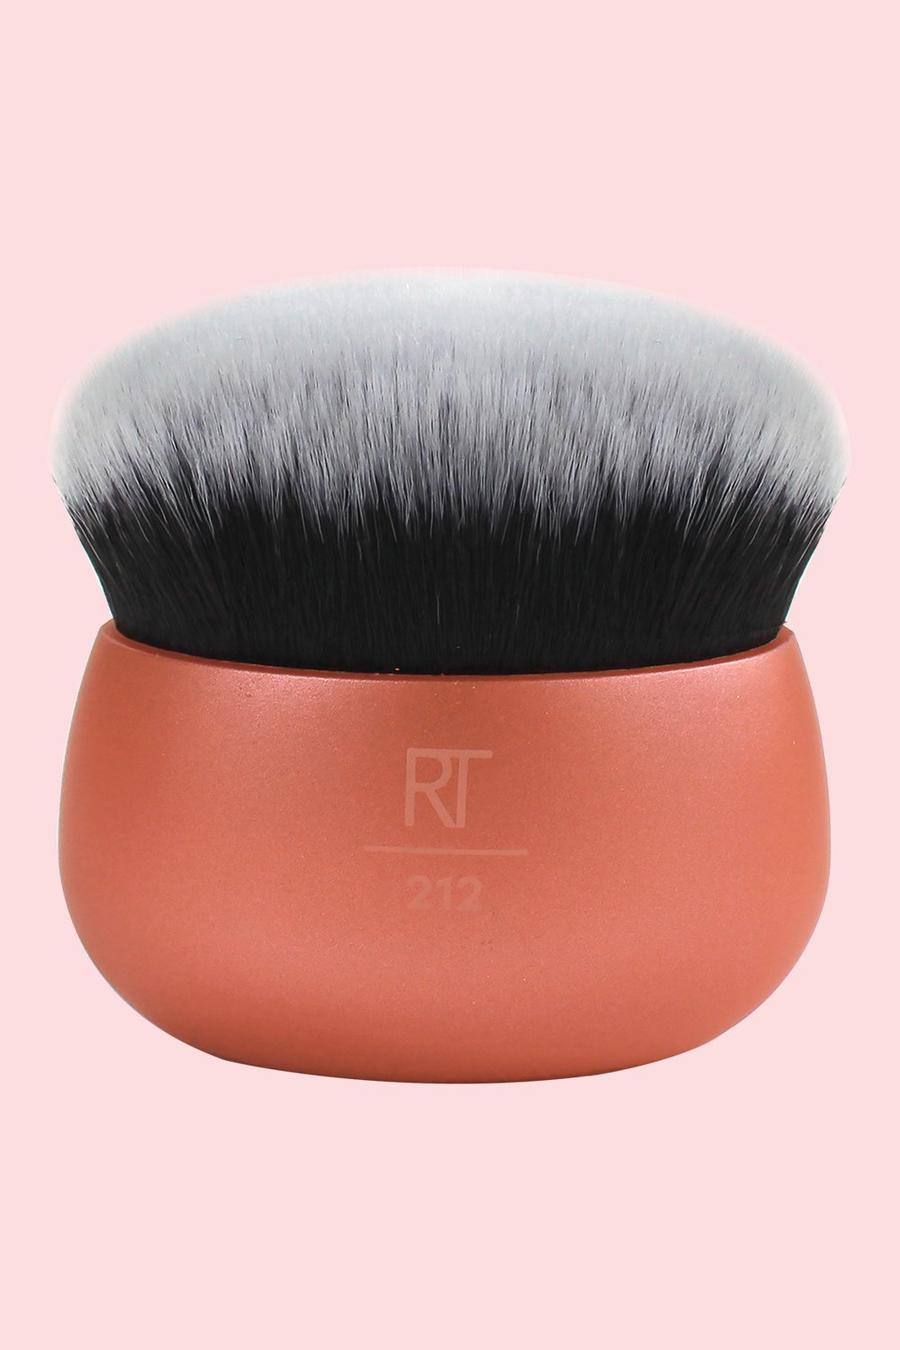 Pink rosa Real Techniques Face & Body Blender Makeup Brush